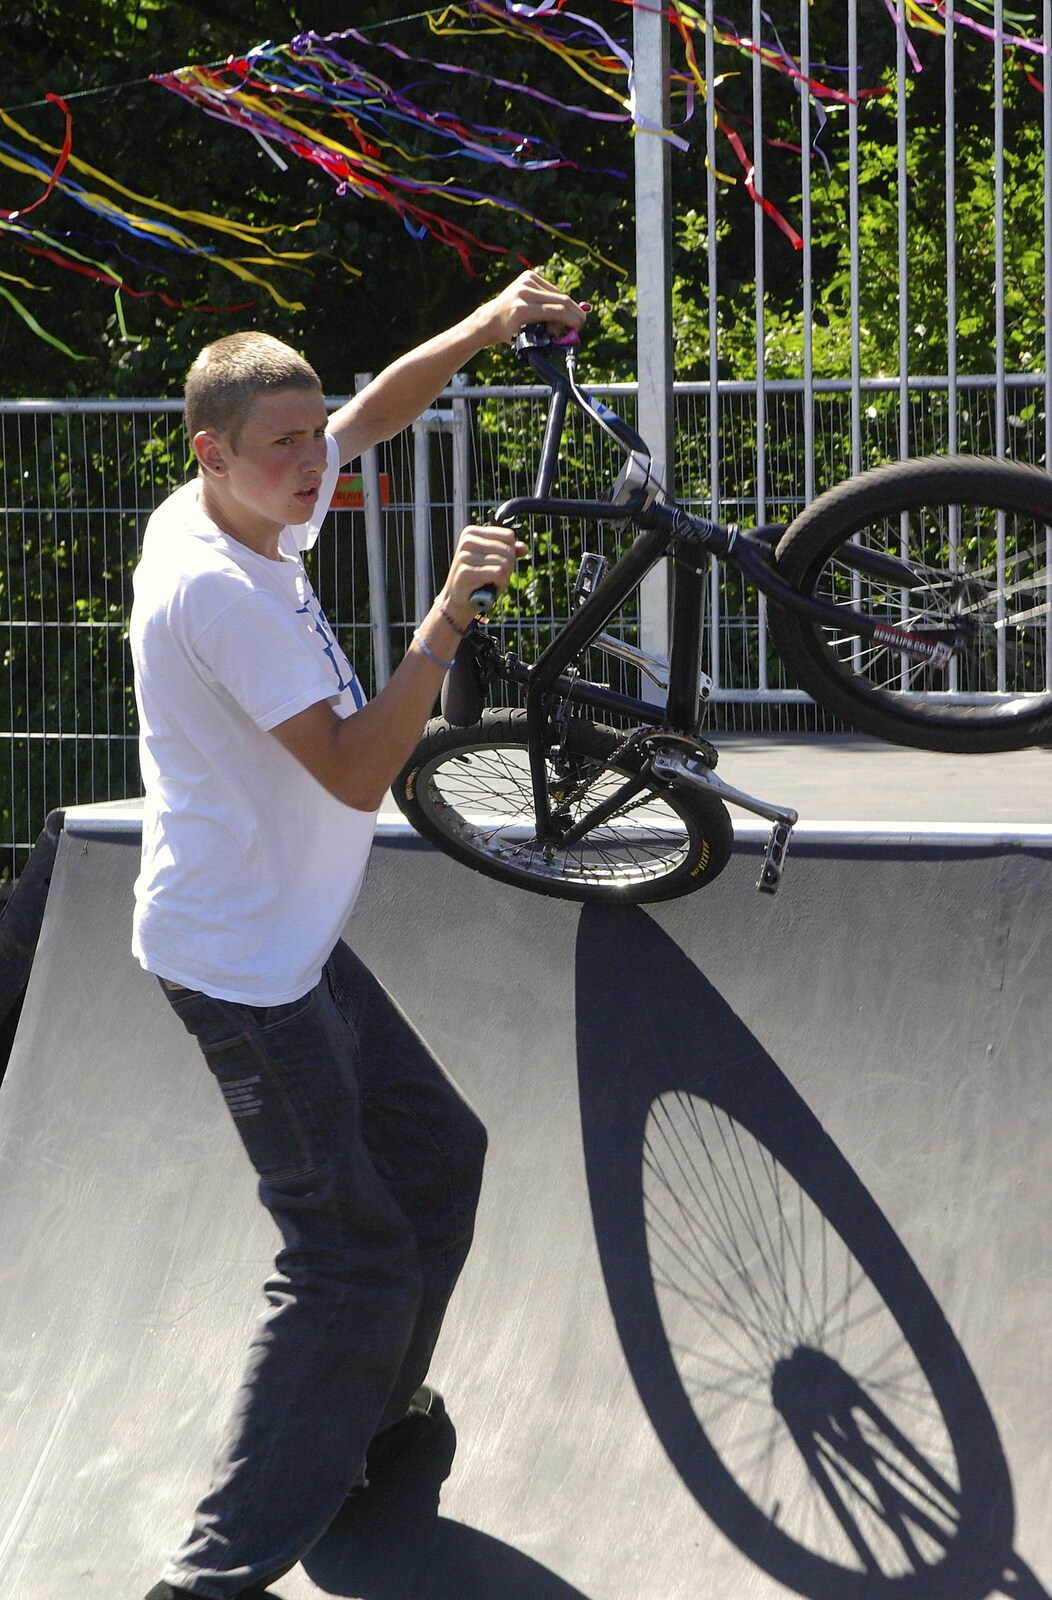 The Opening of Eye Skateboard Park, and The BBs at Cotton, Suffolk - 5th August 2007: A lad gives his BMX a spin